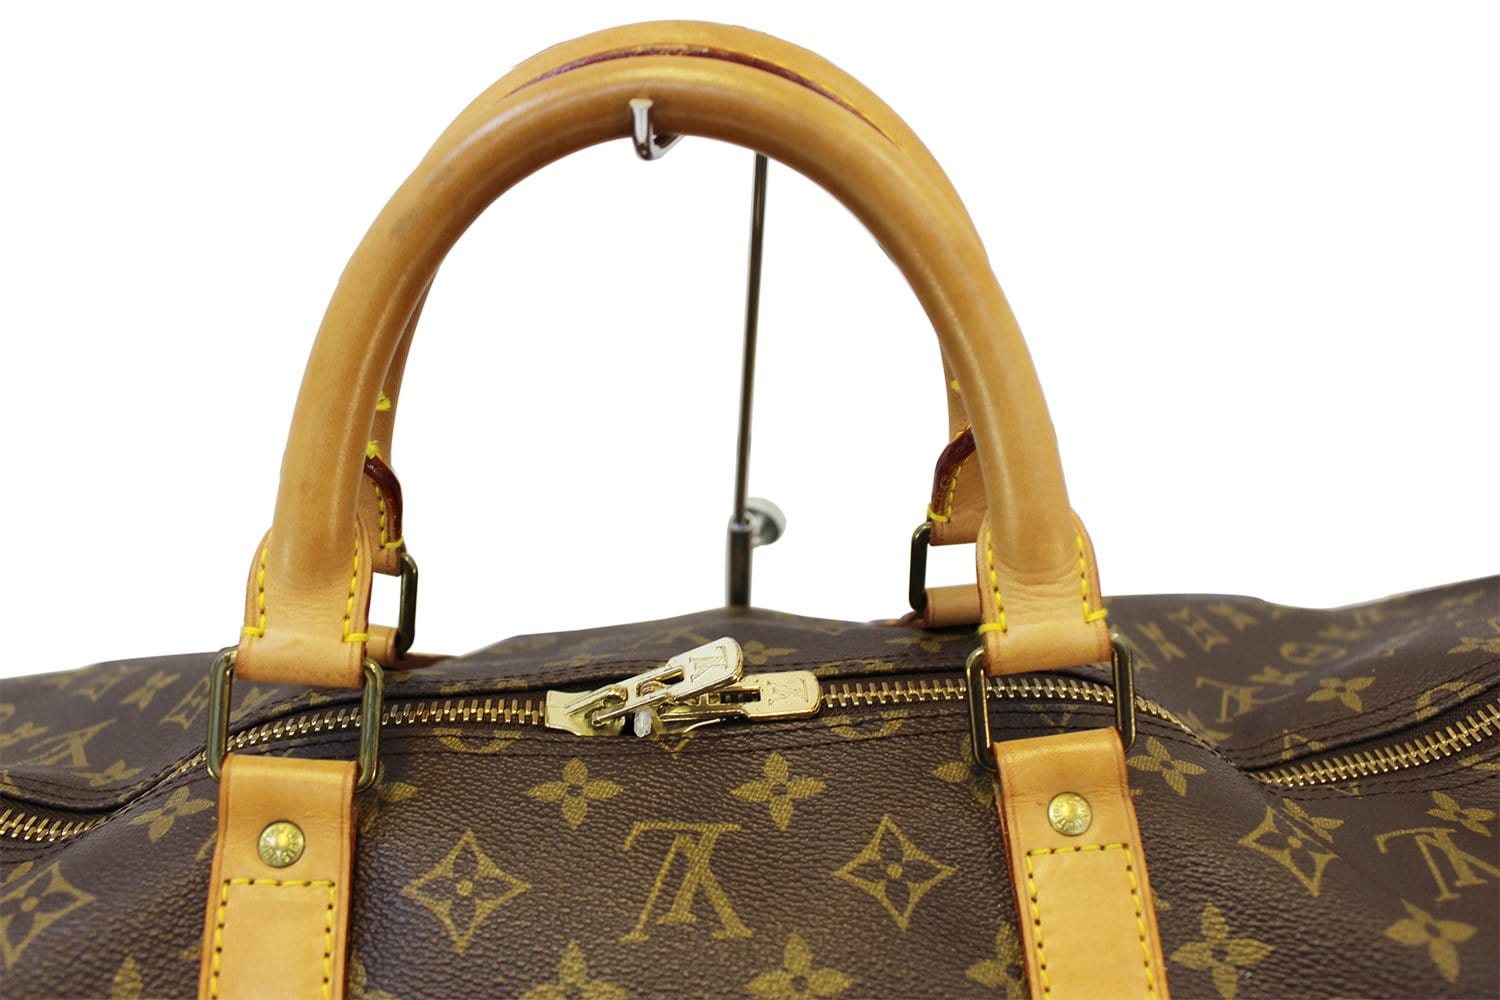 Louis Vuitton Vintage Monogram Keepall 60 Travel Bag ○ Labellov ○ Buy and  Sell Authentic Luxury